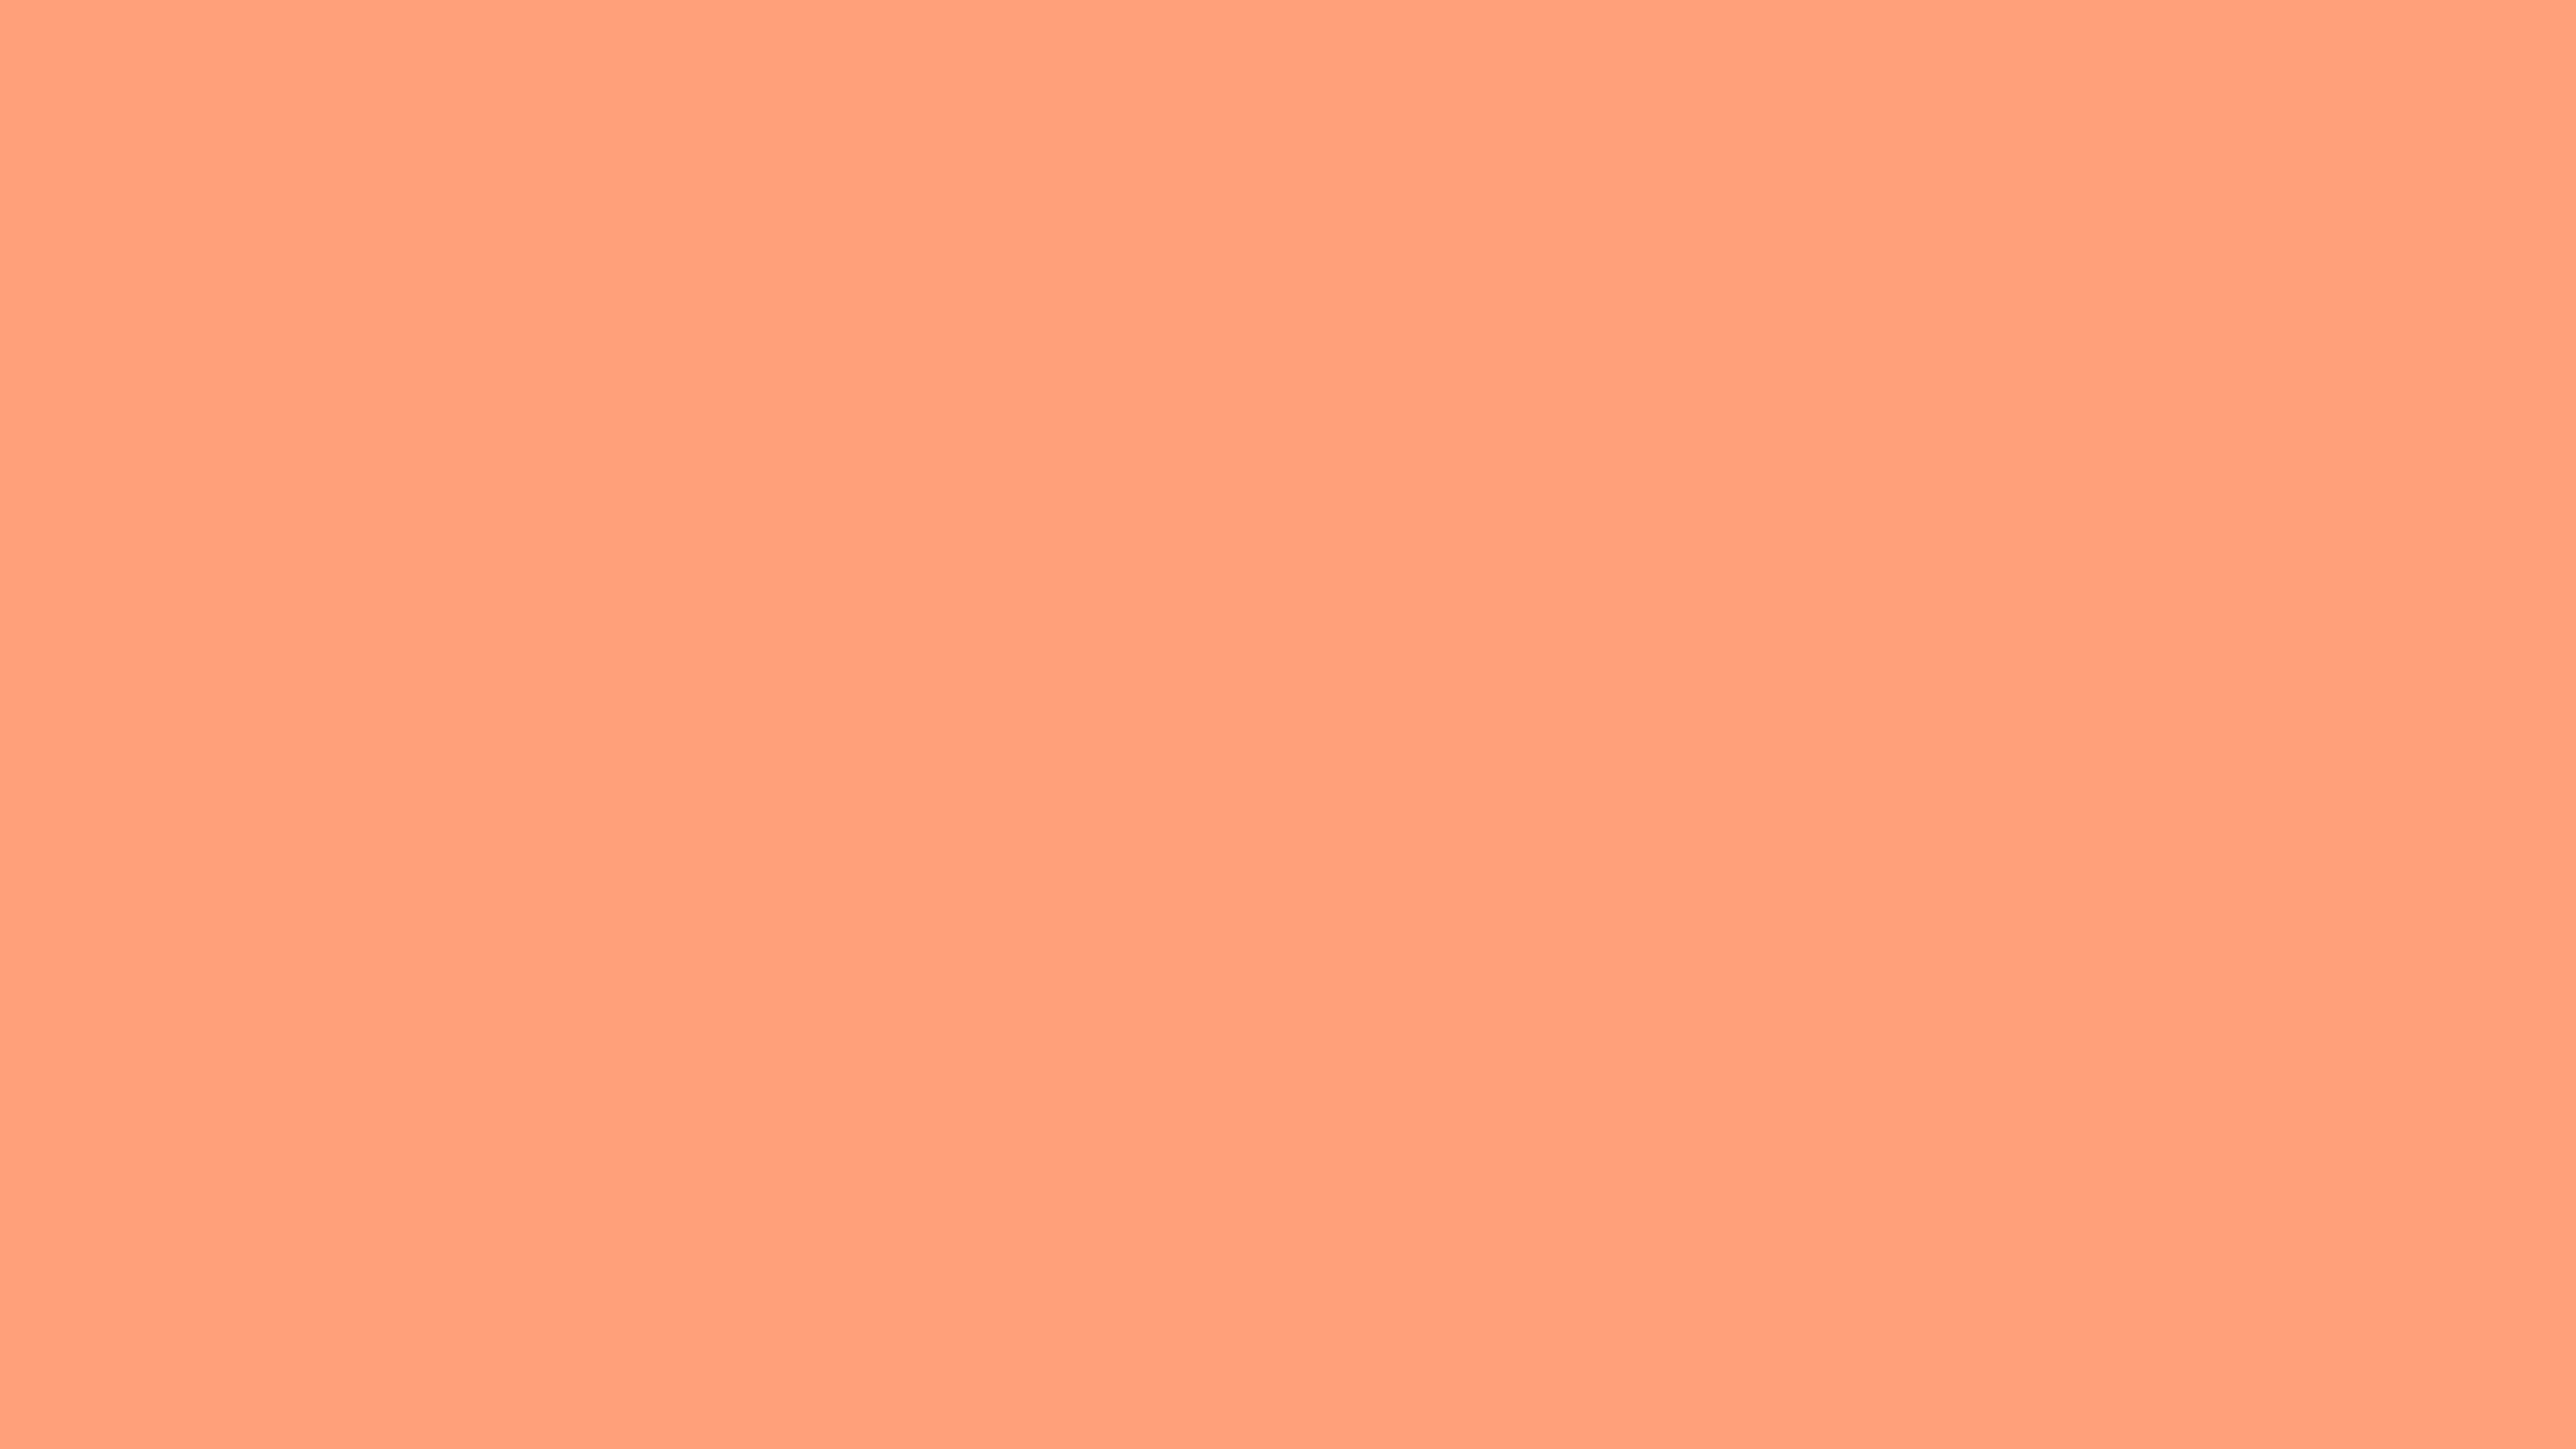 4096x2304 Light Salmon Solid Color Background